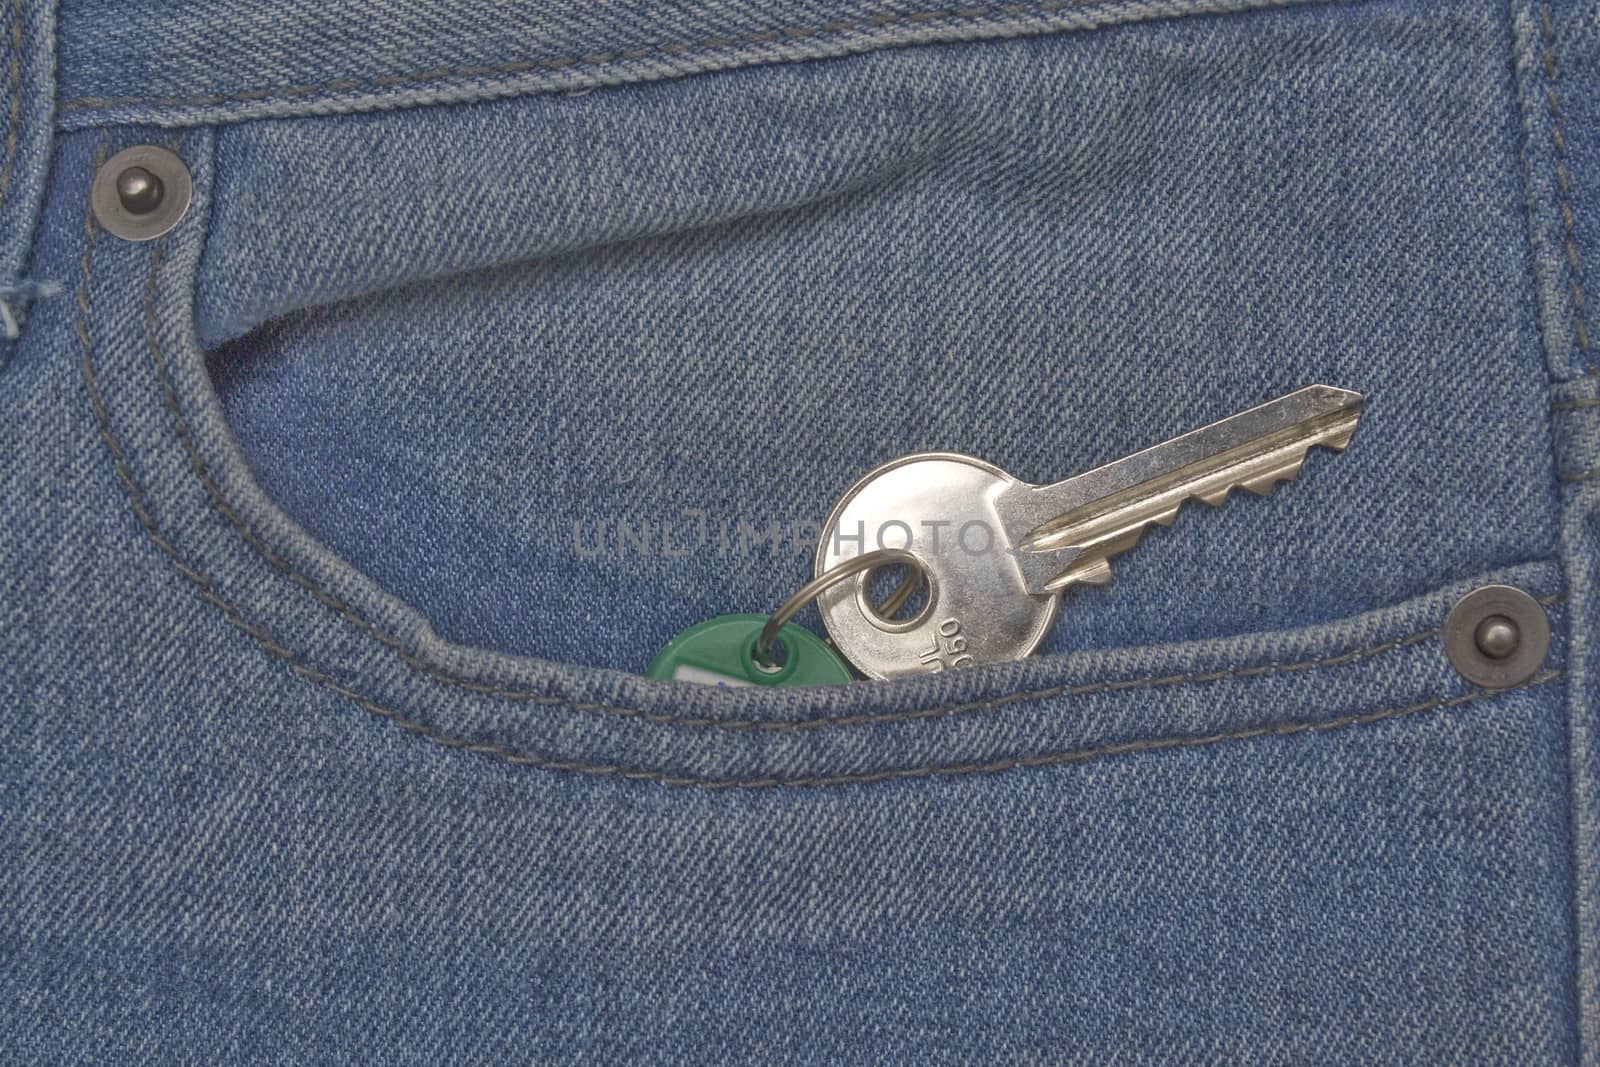 Denim jeans pocket with house key hanging out